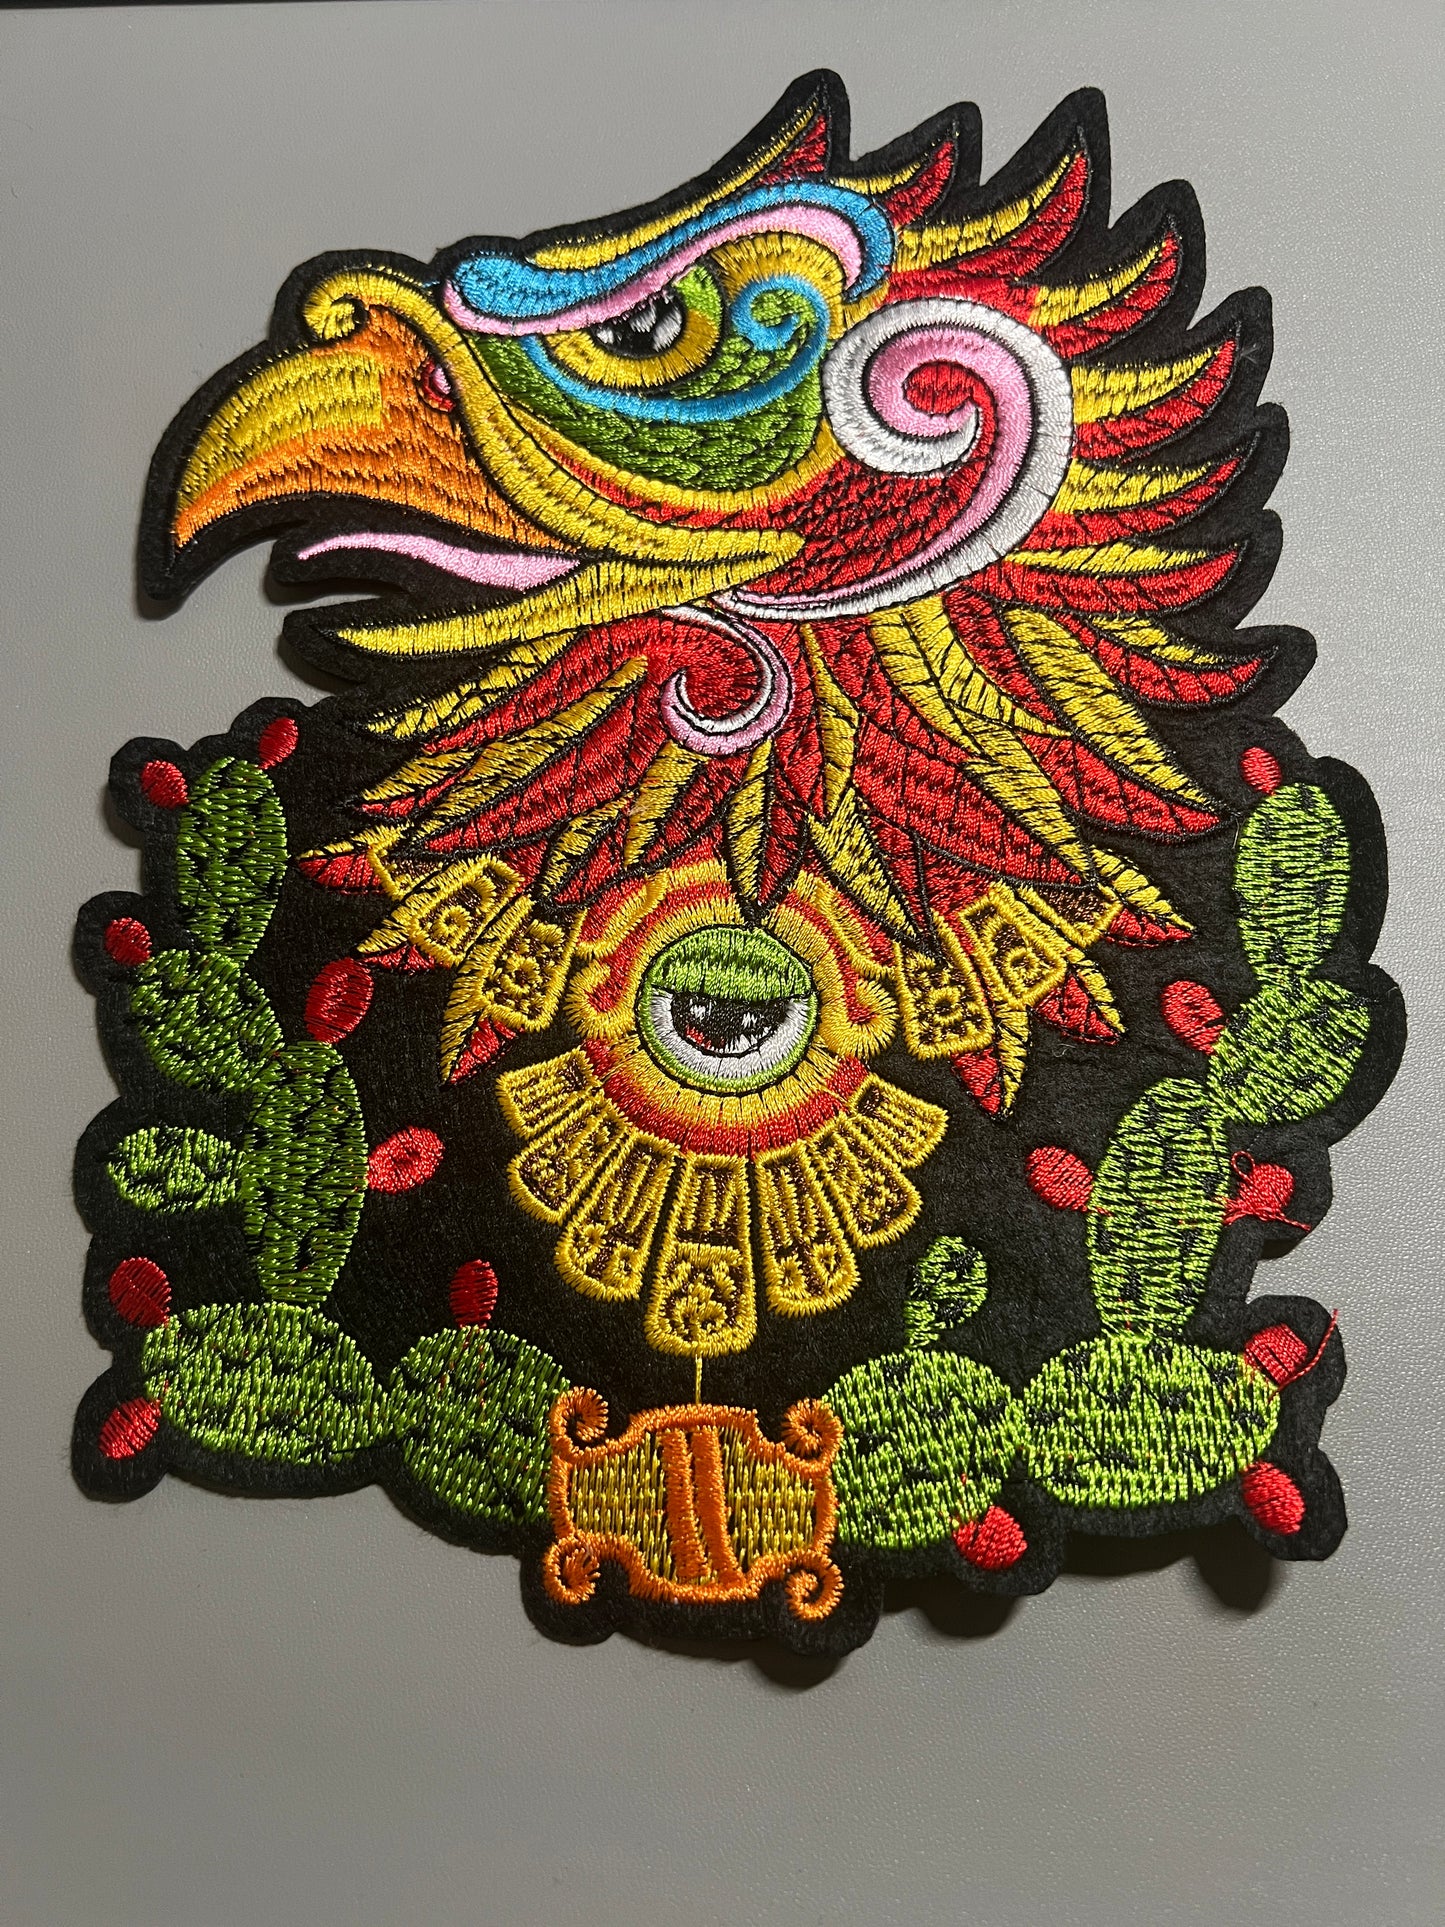 Aztec Foundation Patch, Mexica Back Patch, Eagle, Ollin, Cactus, 8.75" Iron-On patches (#27)